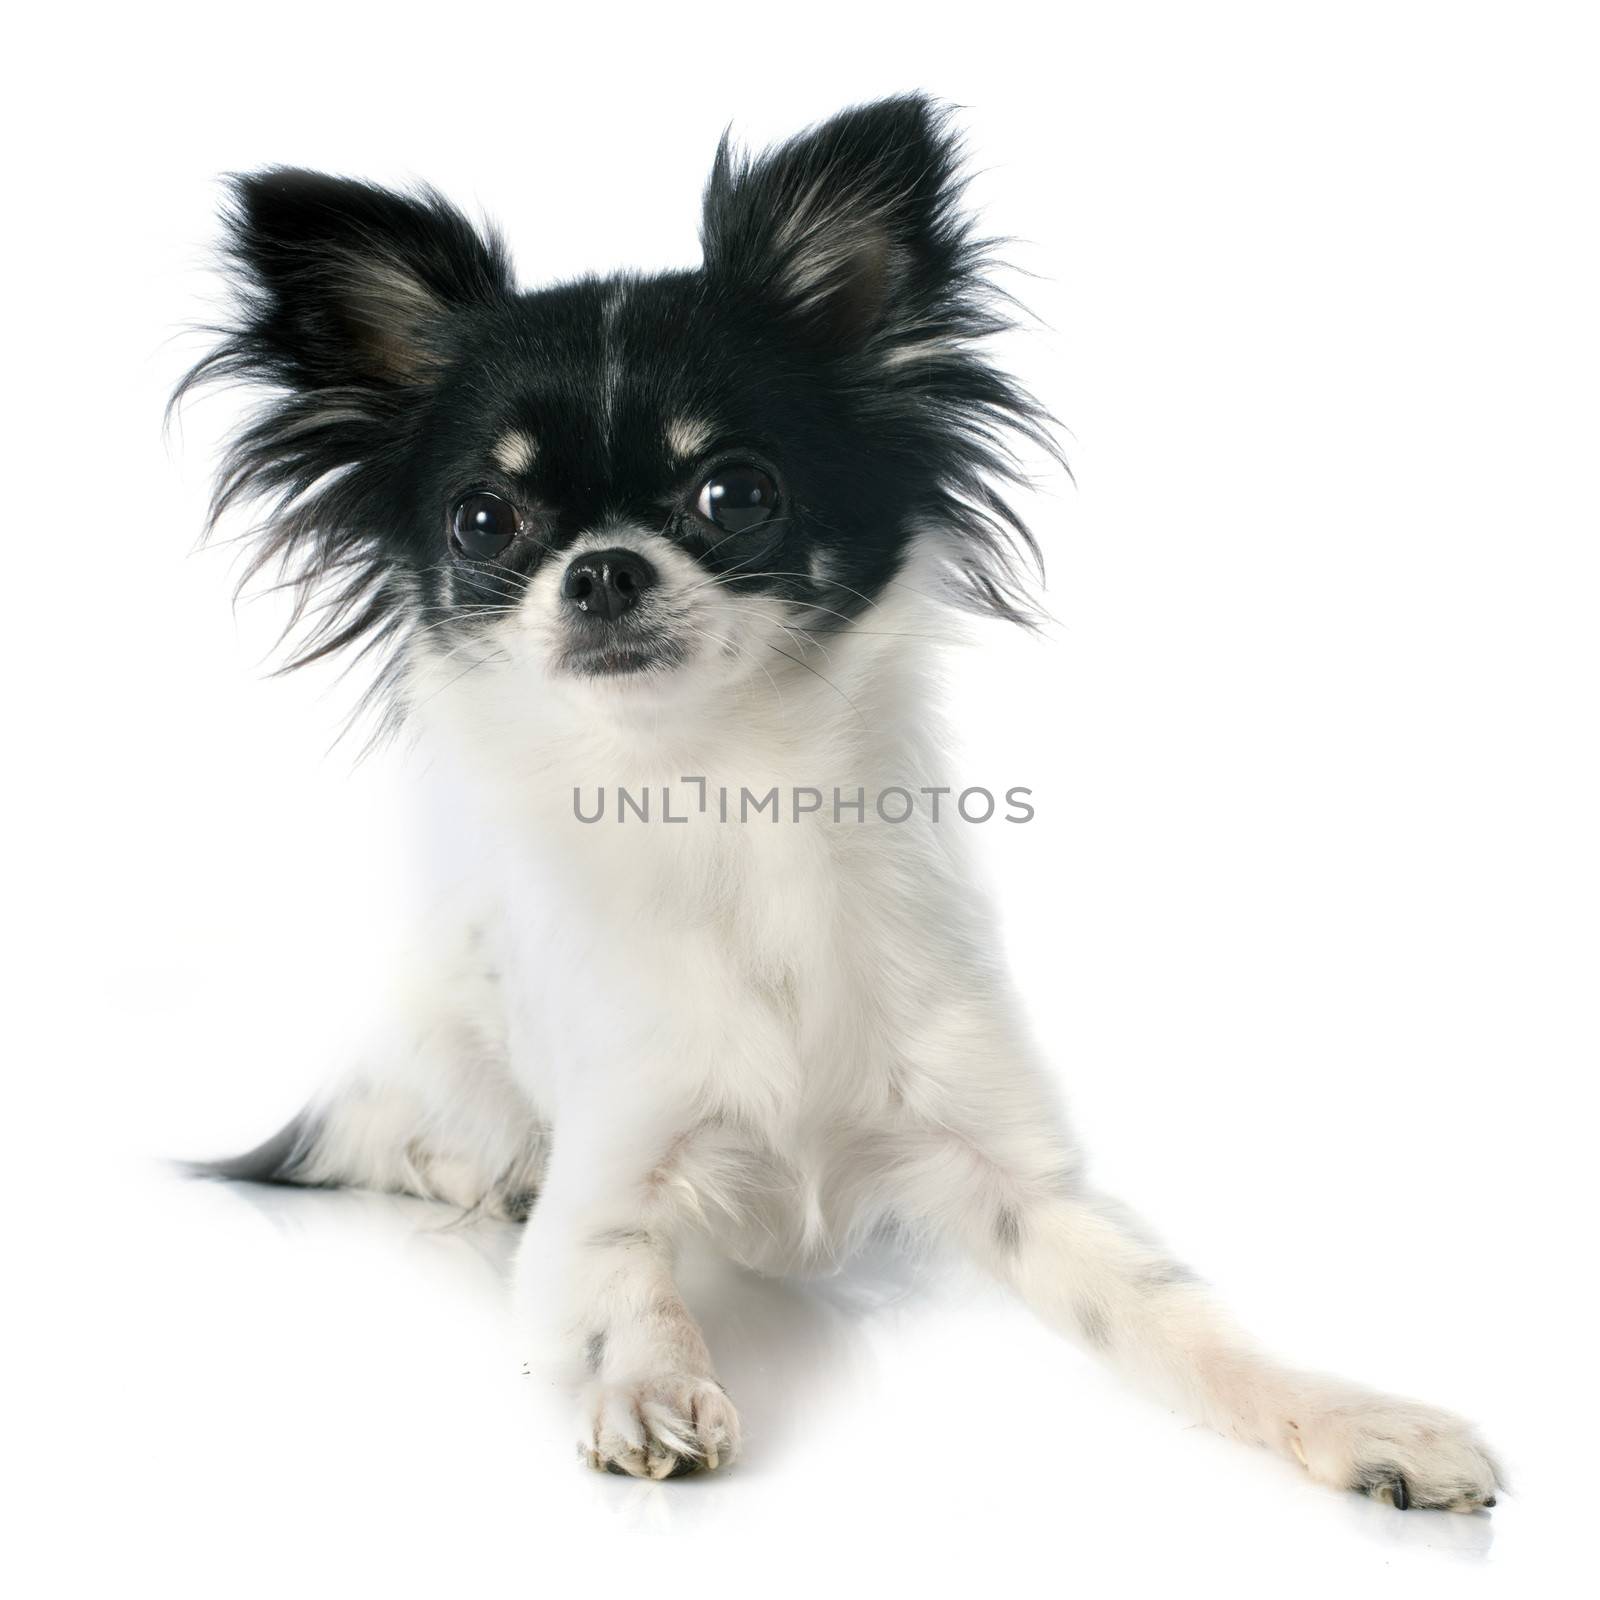 portrait of a cute purebred chihuahua in front of white background